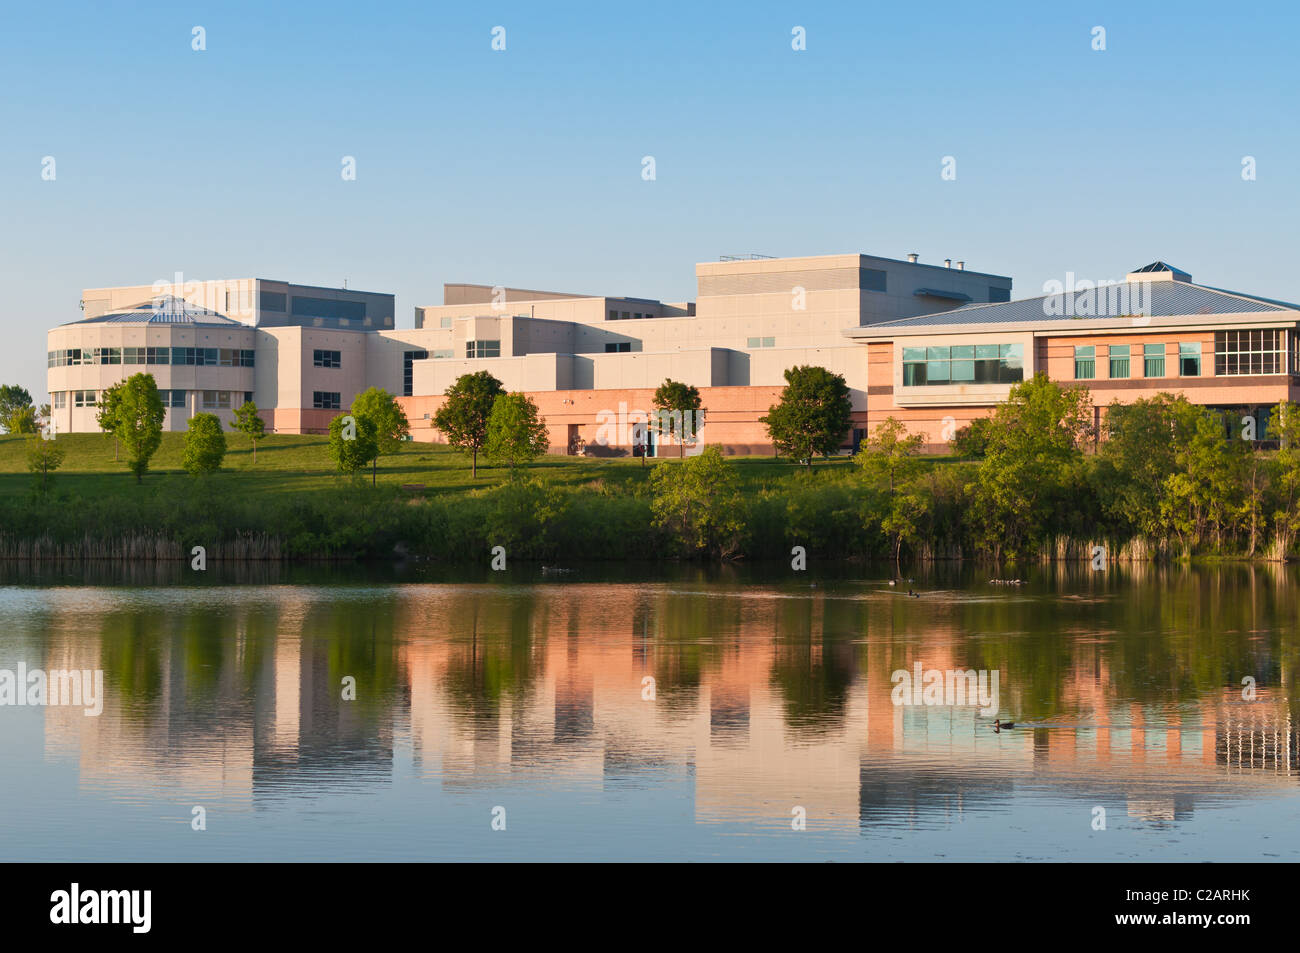 A community center building surrounded by a park is shown reflected in the water of a large pond. Stock Photo